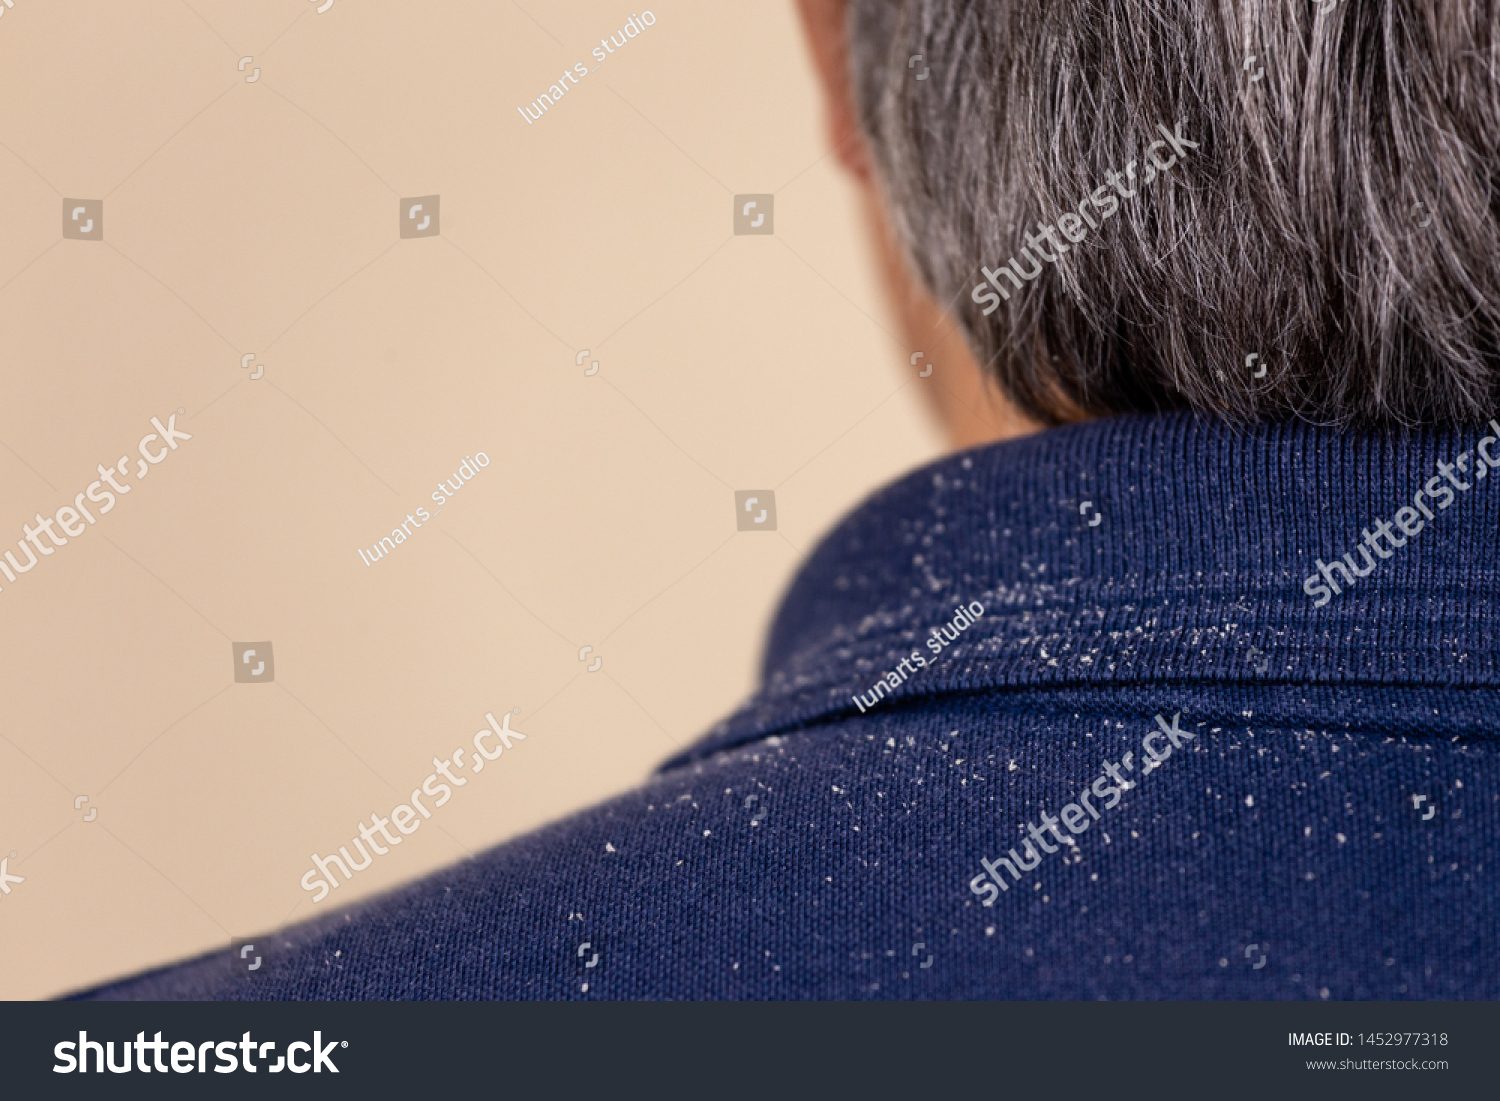 Close-up view of a man who has a lot of dandruff from his hair on his shirt and shoulders. Fatty Dandruff #1452977318